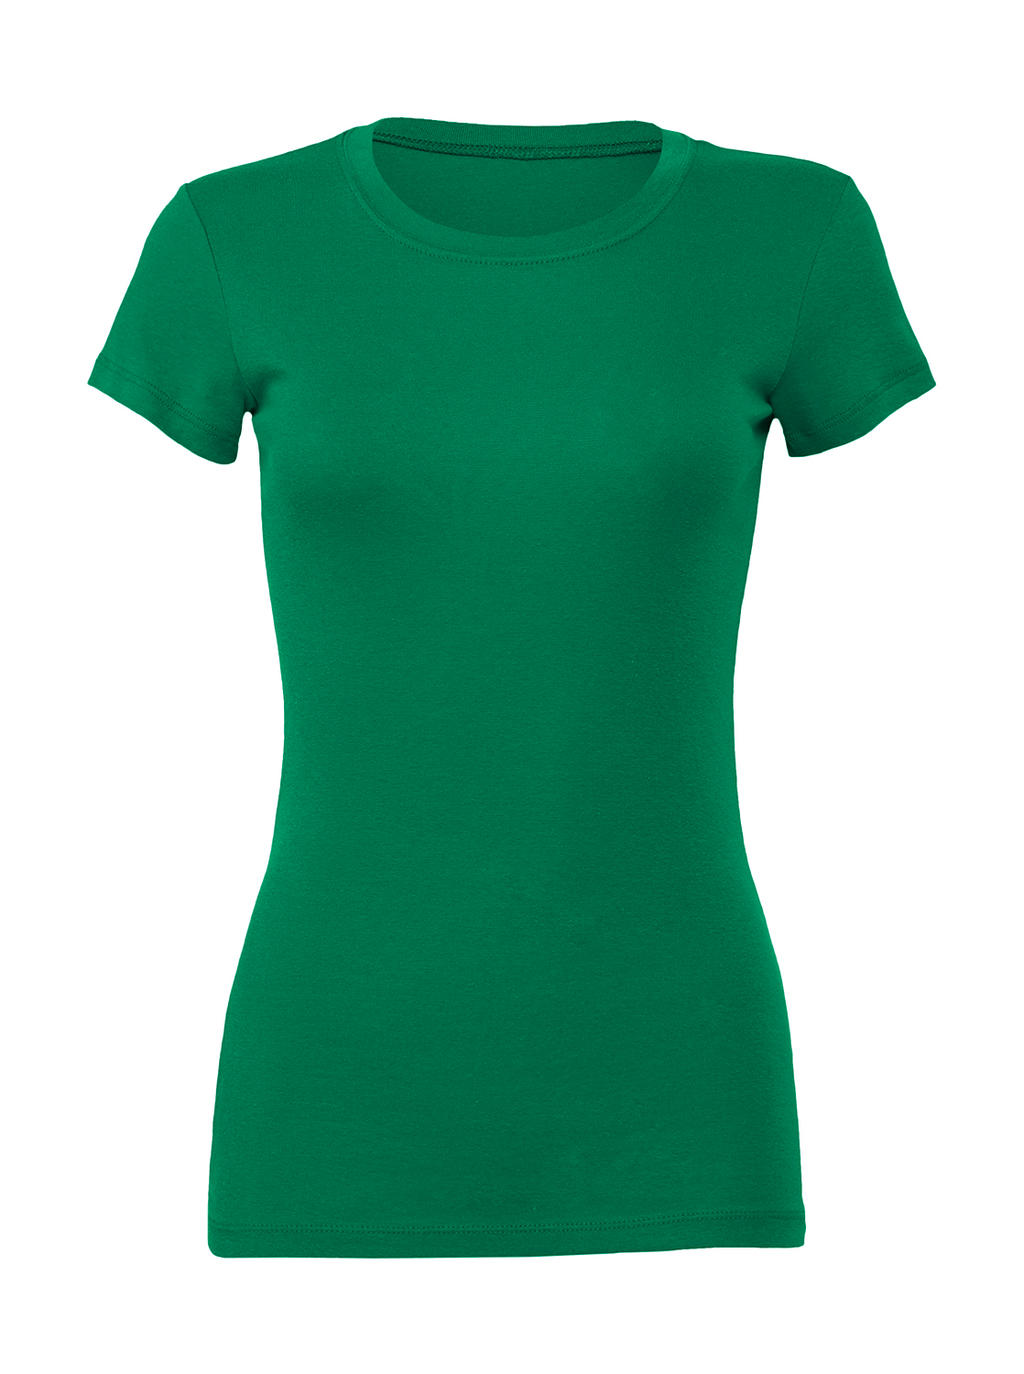  The Favorite T-Shirt in Farbe Kelly Green